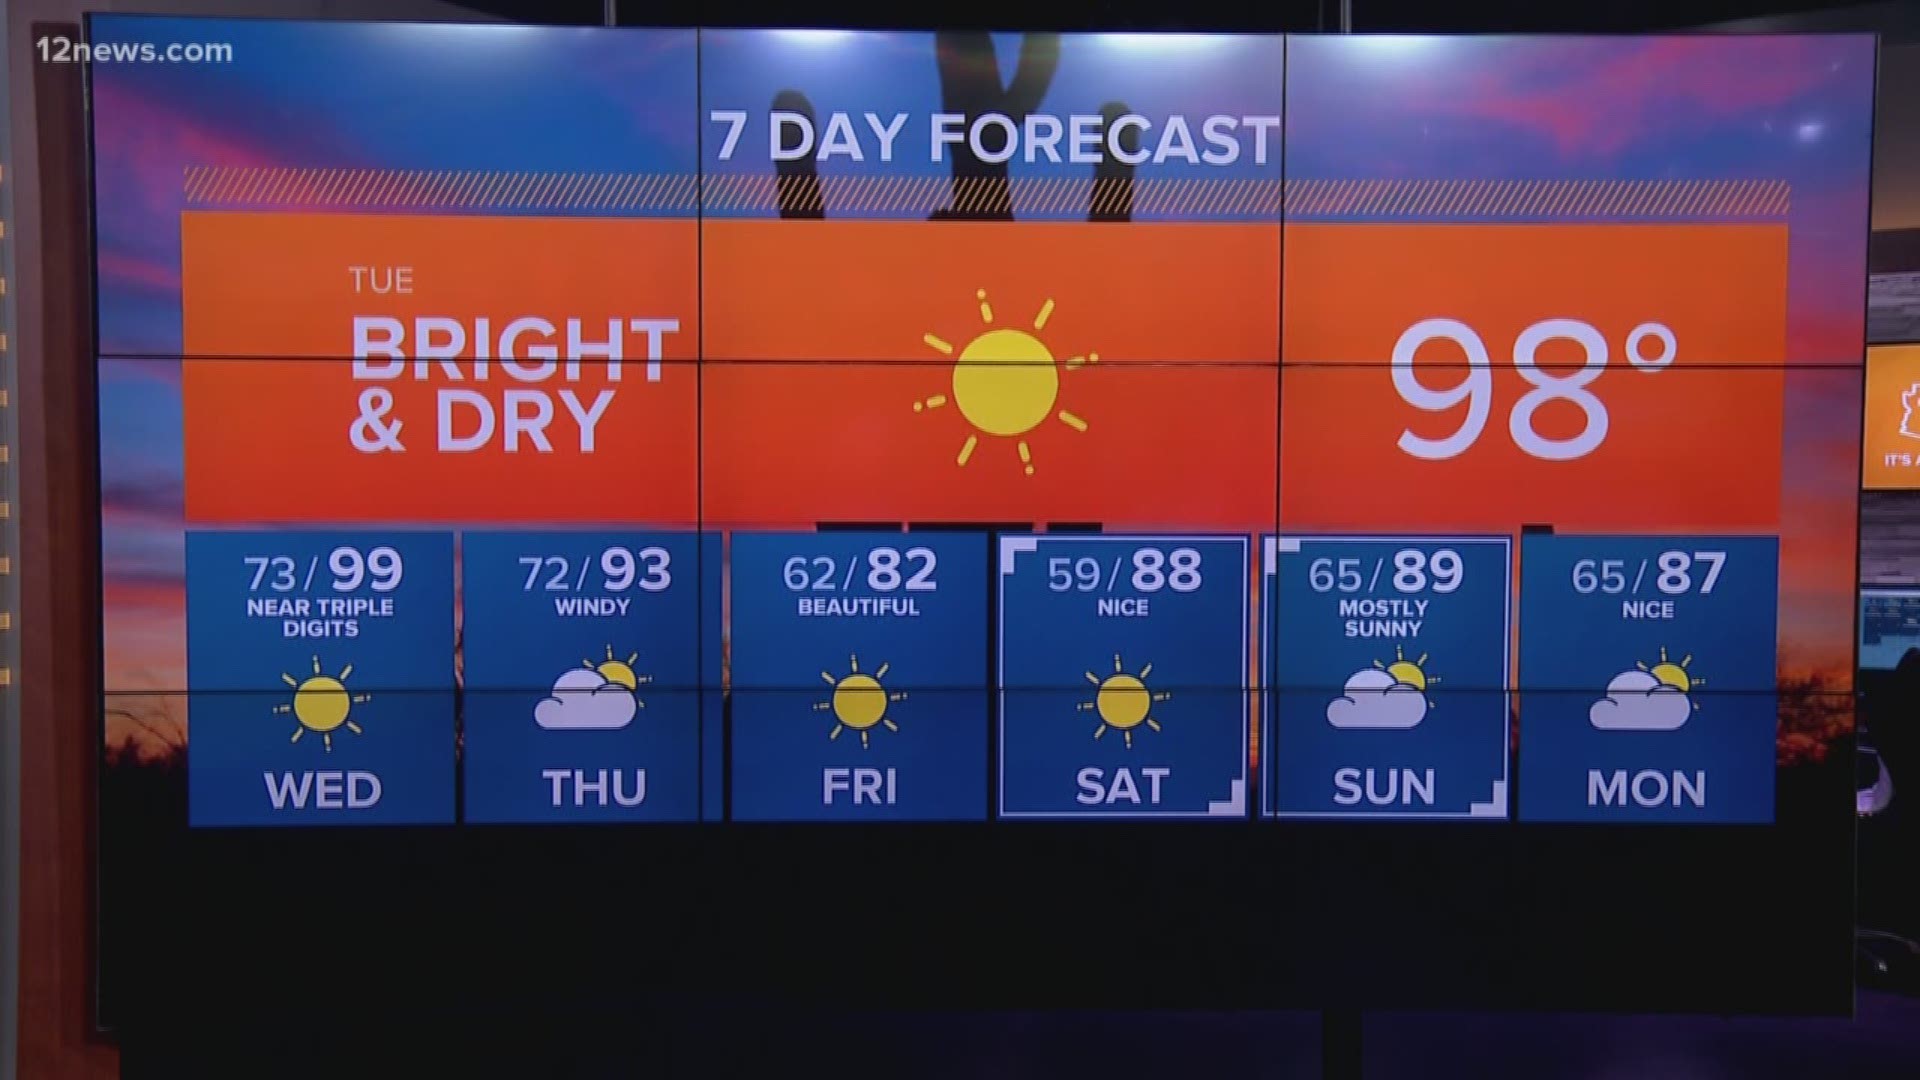 Phoenix is looking at temps in the high 90s for the next few days before another cool down.